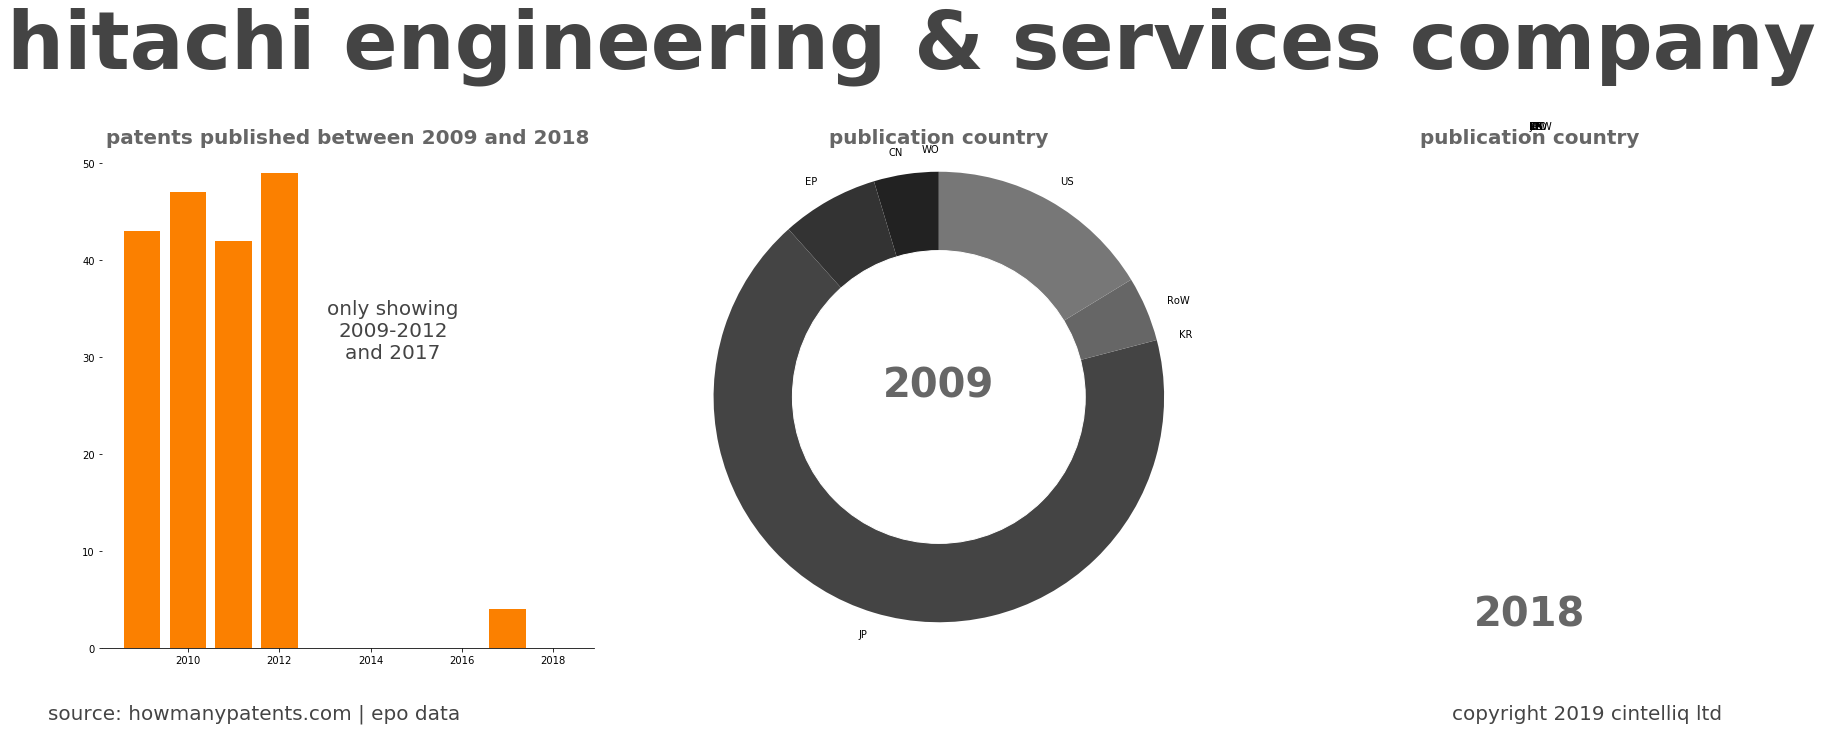 summary of patents for Hitachi Engineering & Services Company